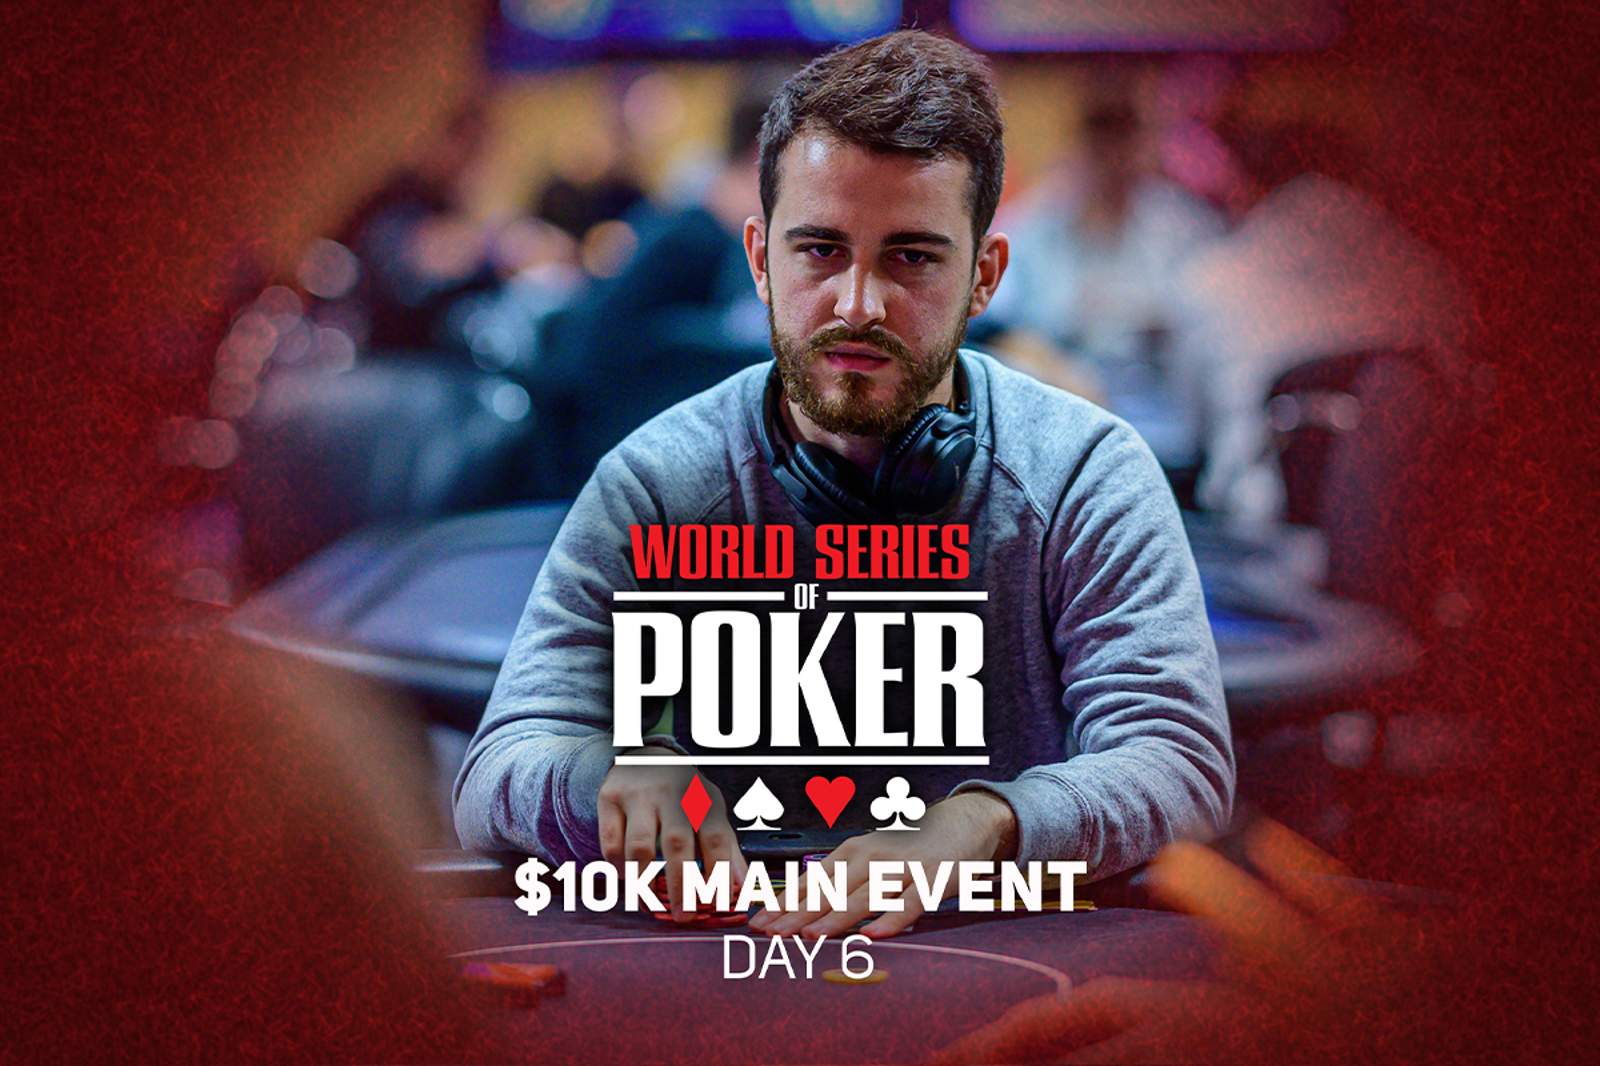 Watch Day 6 of the 2021 WSOP Main Event on PokerGO.com at 6 p.m. ET